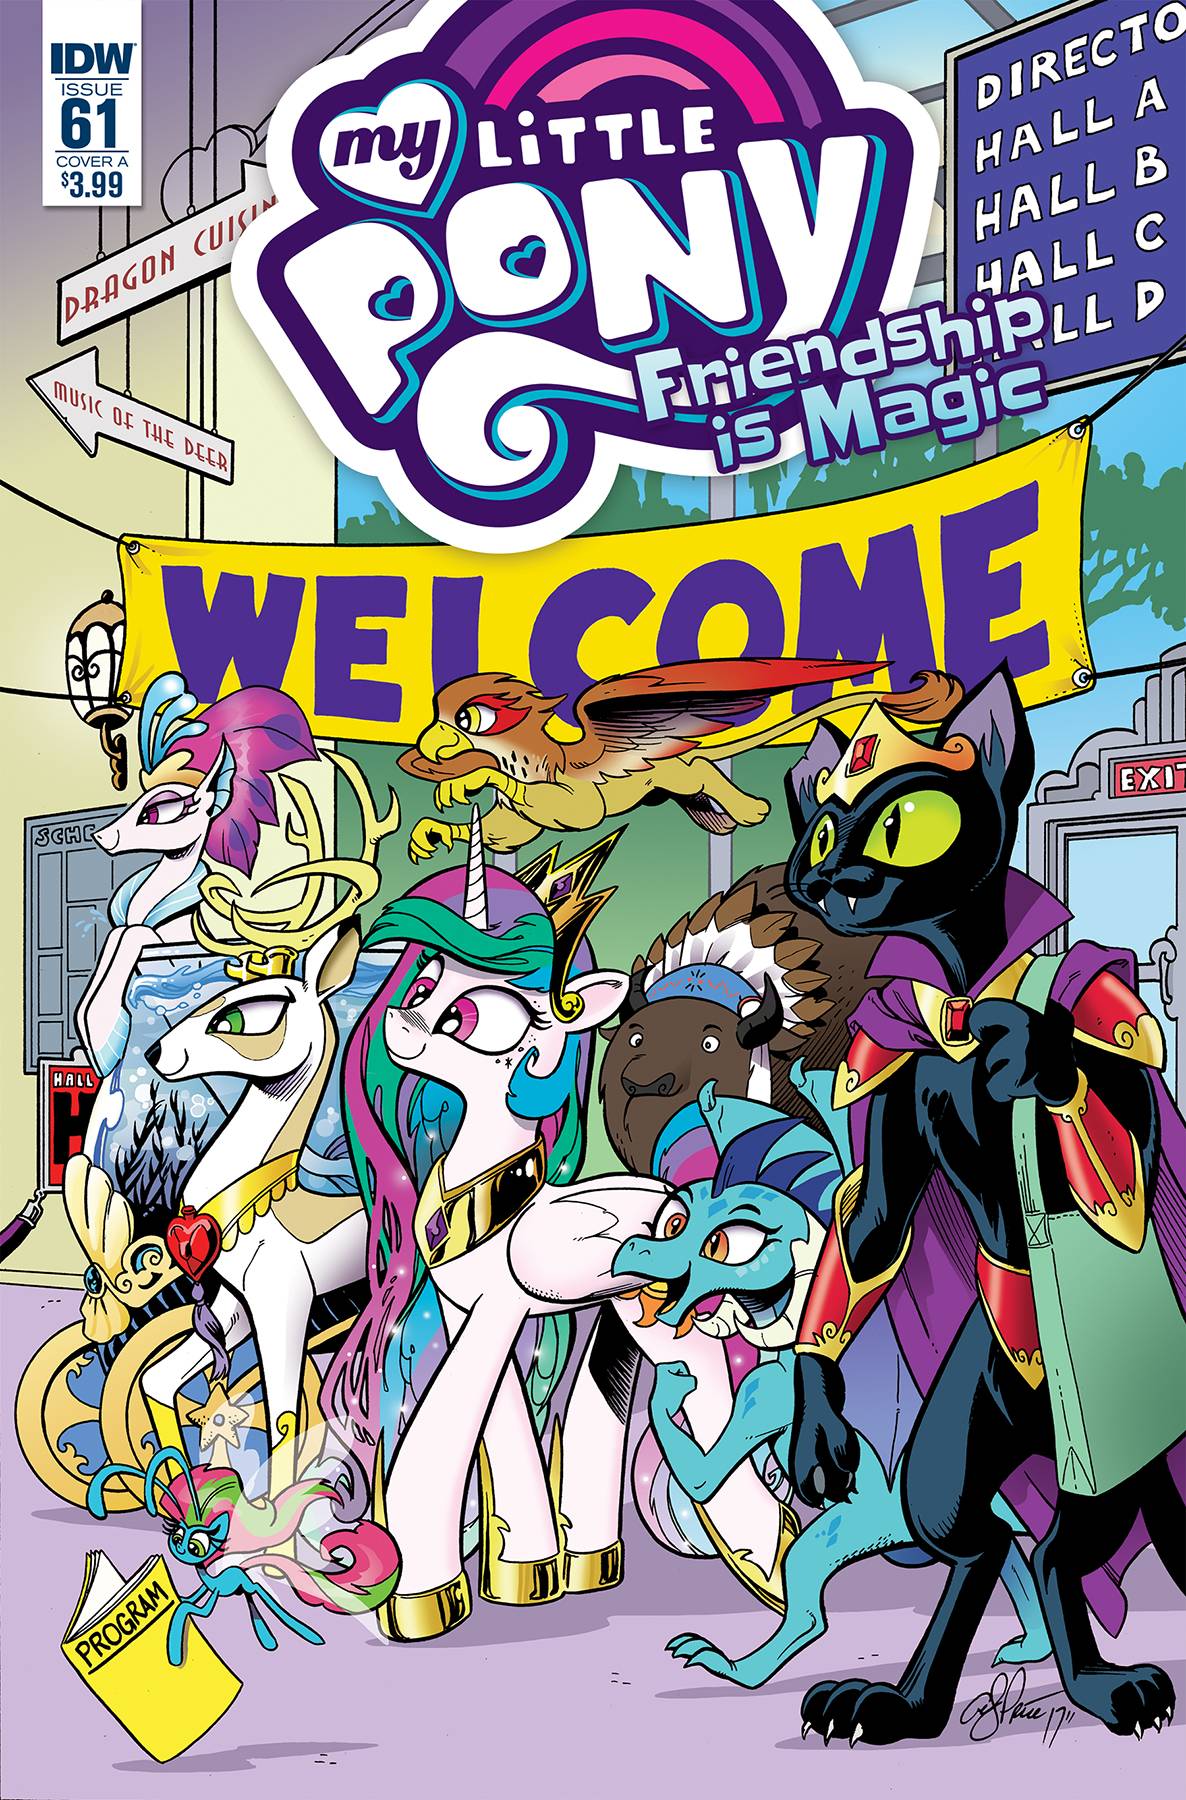 My Little Pony Friendship Is Magic #61 Cover A Price